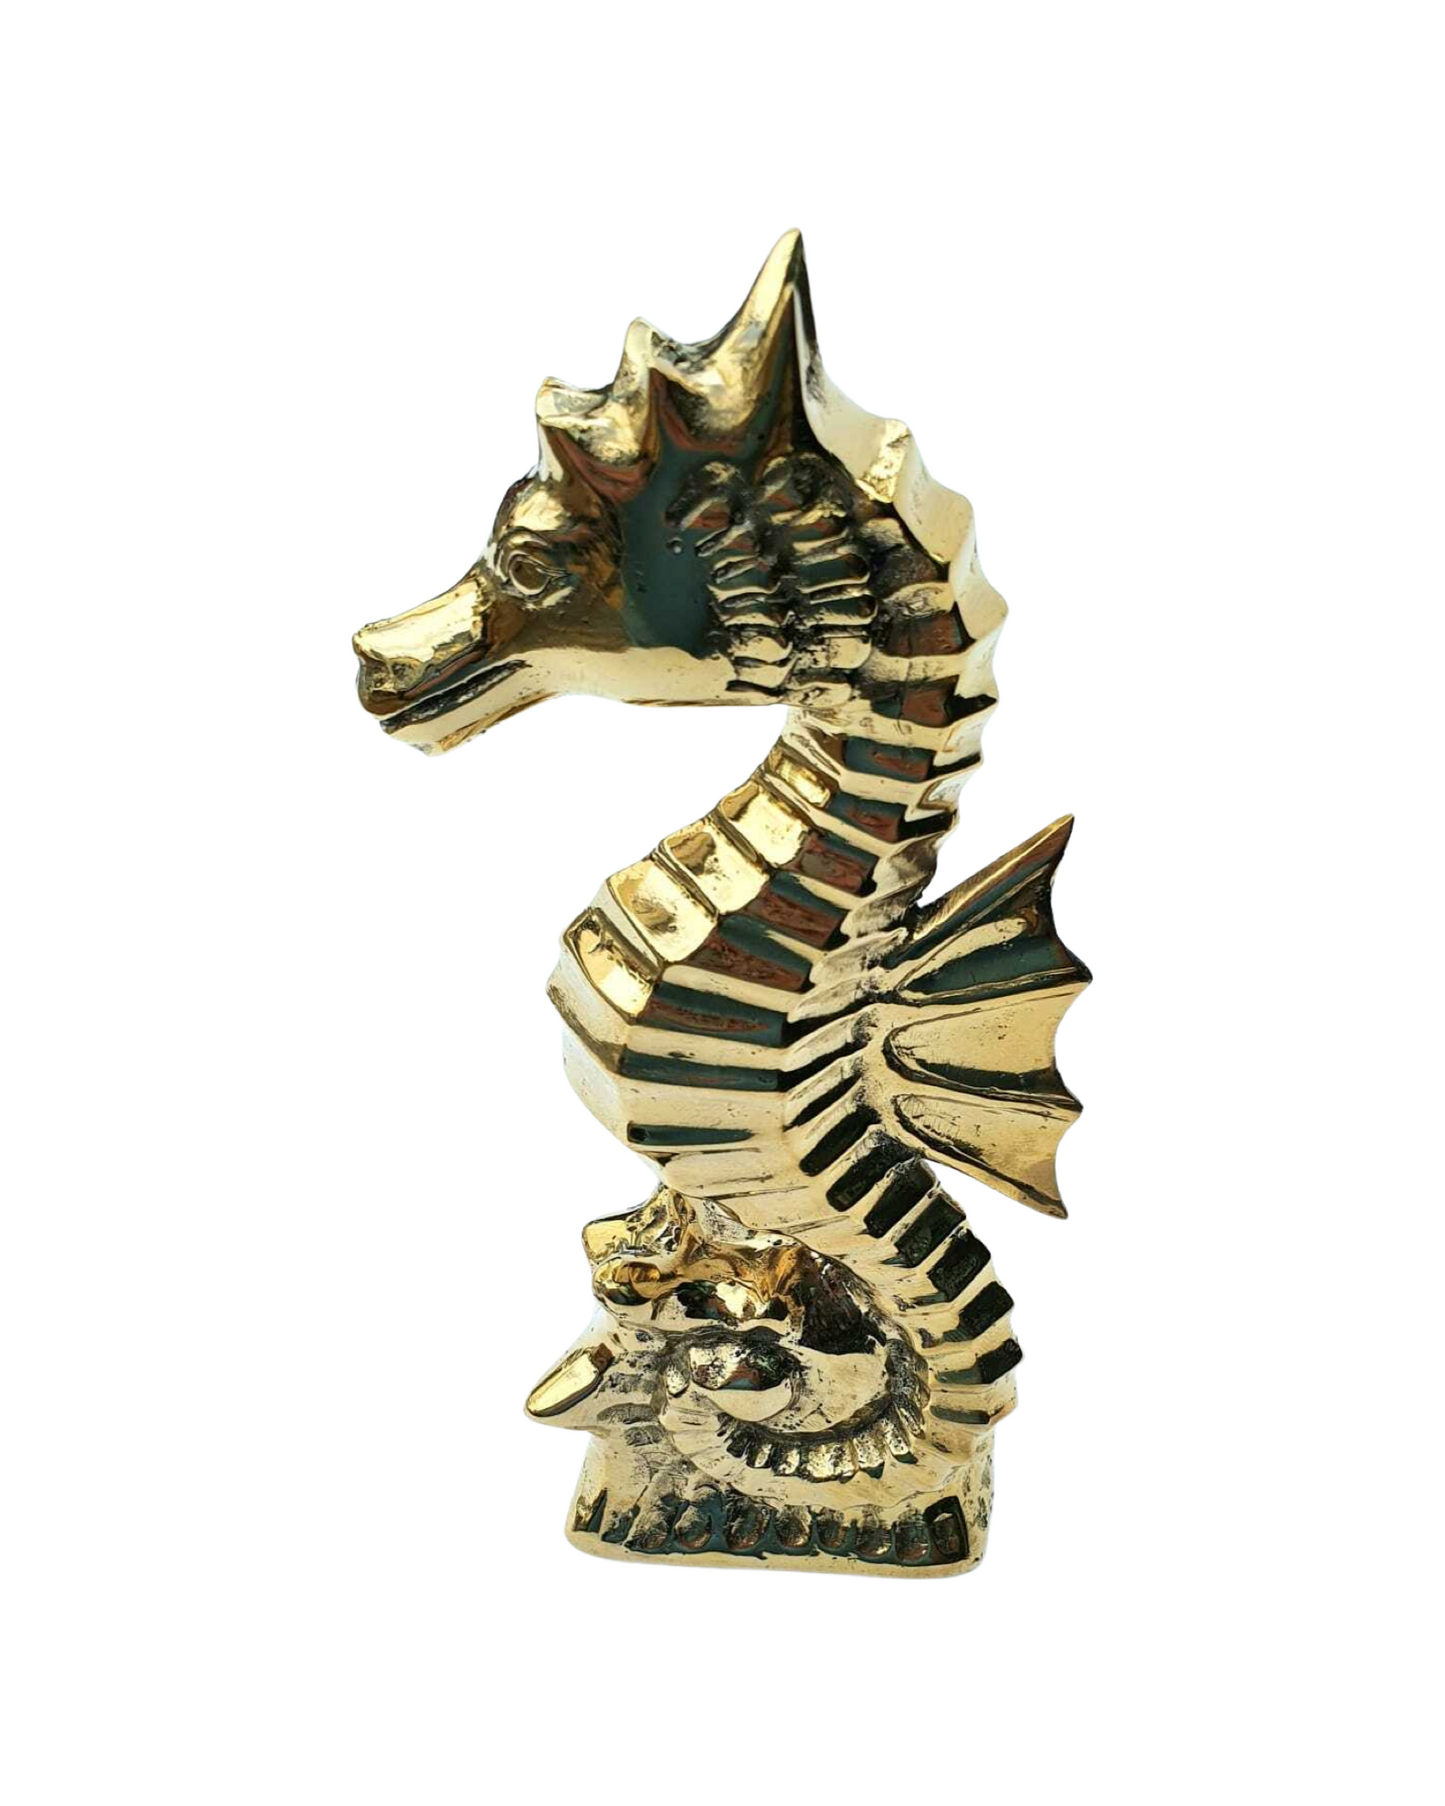 A standing sea horse made out of brass 